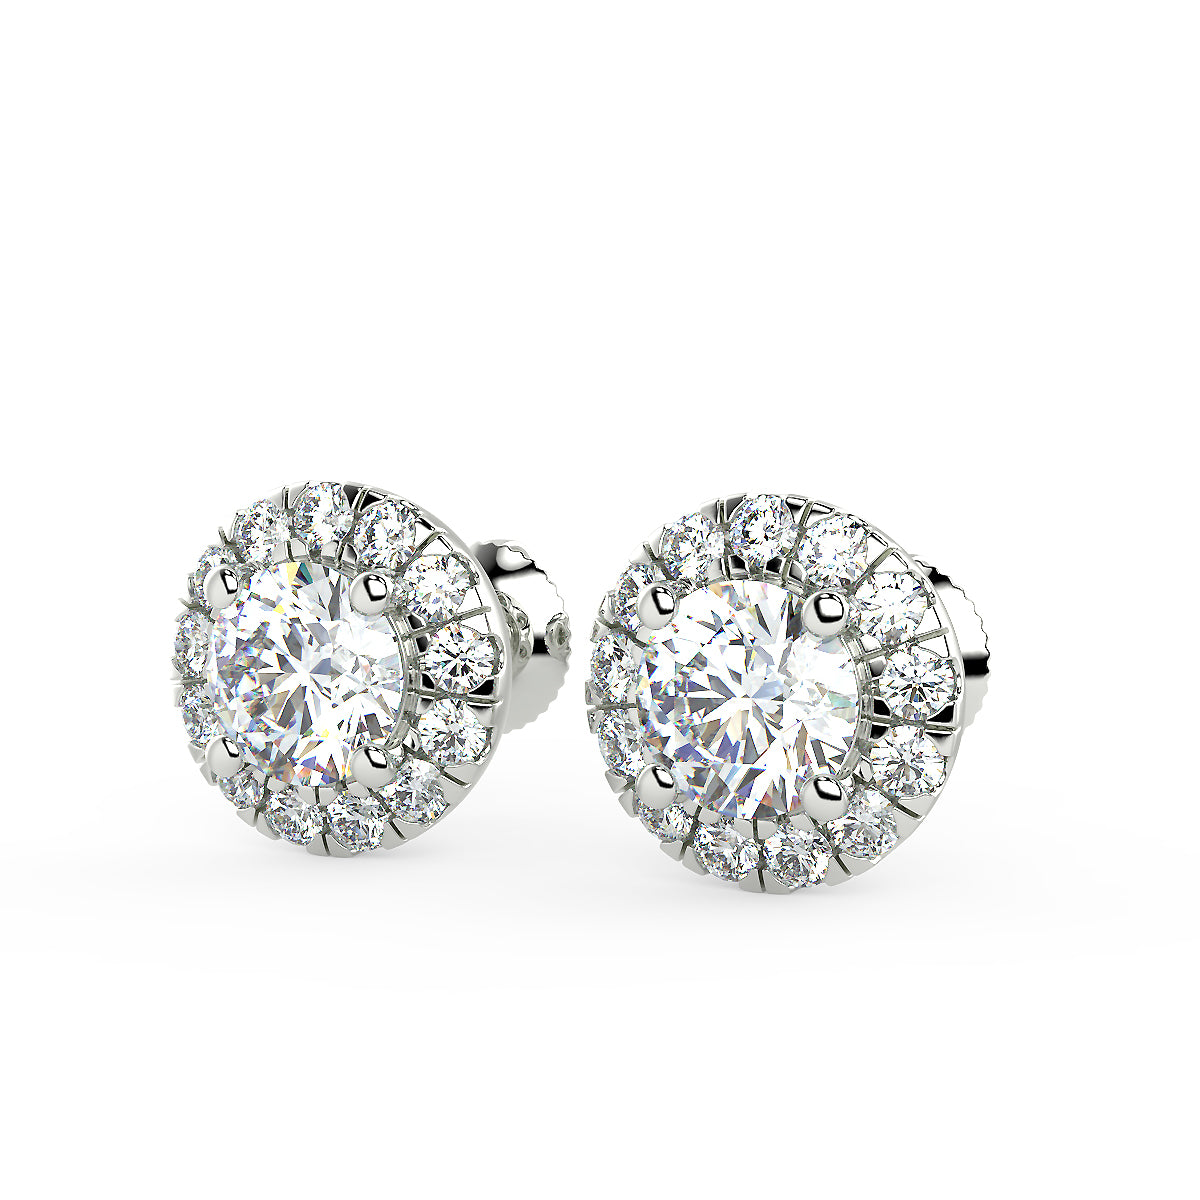 Cassiopeia Stud Earrings (1.40 Ct. Tw.)